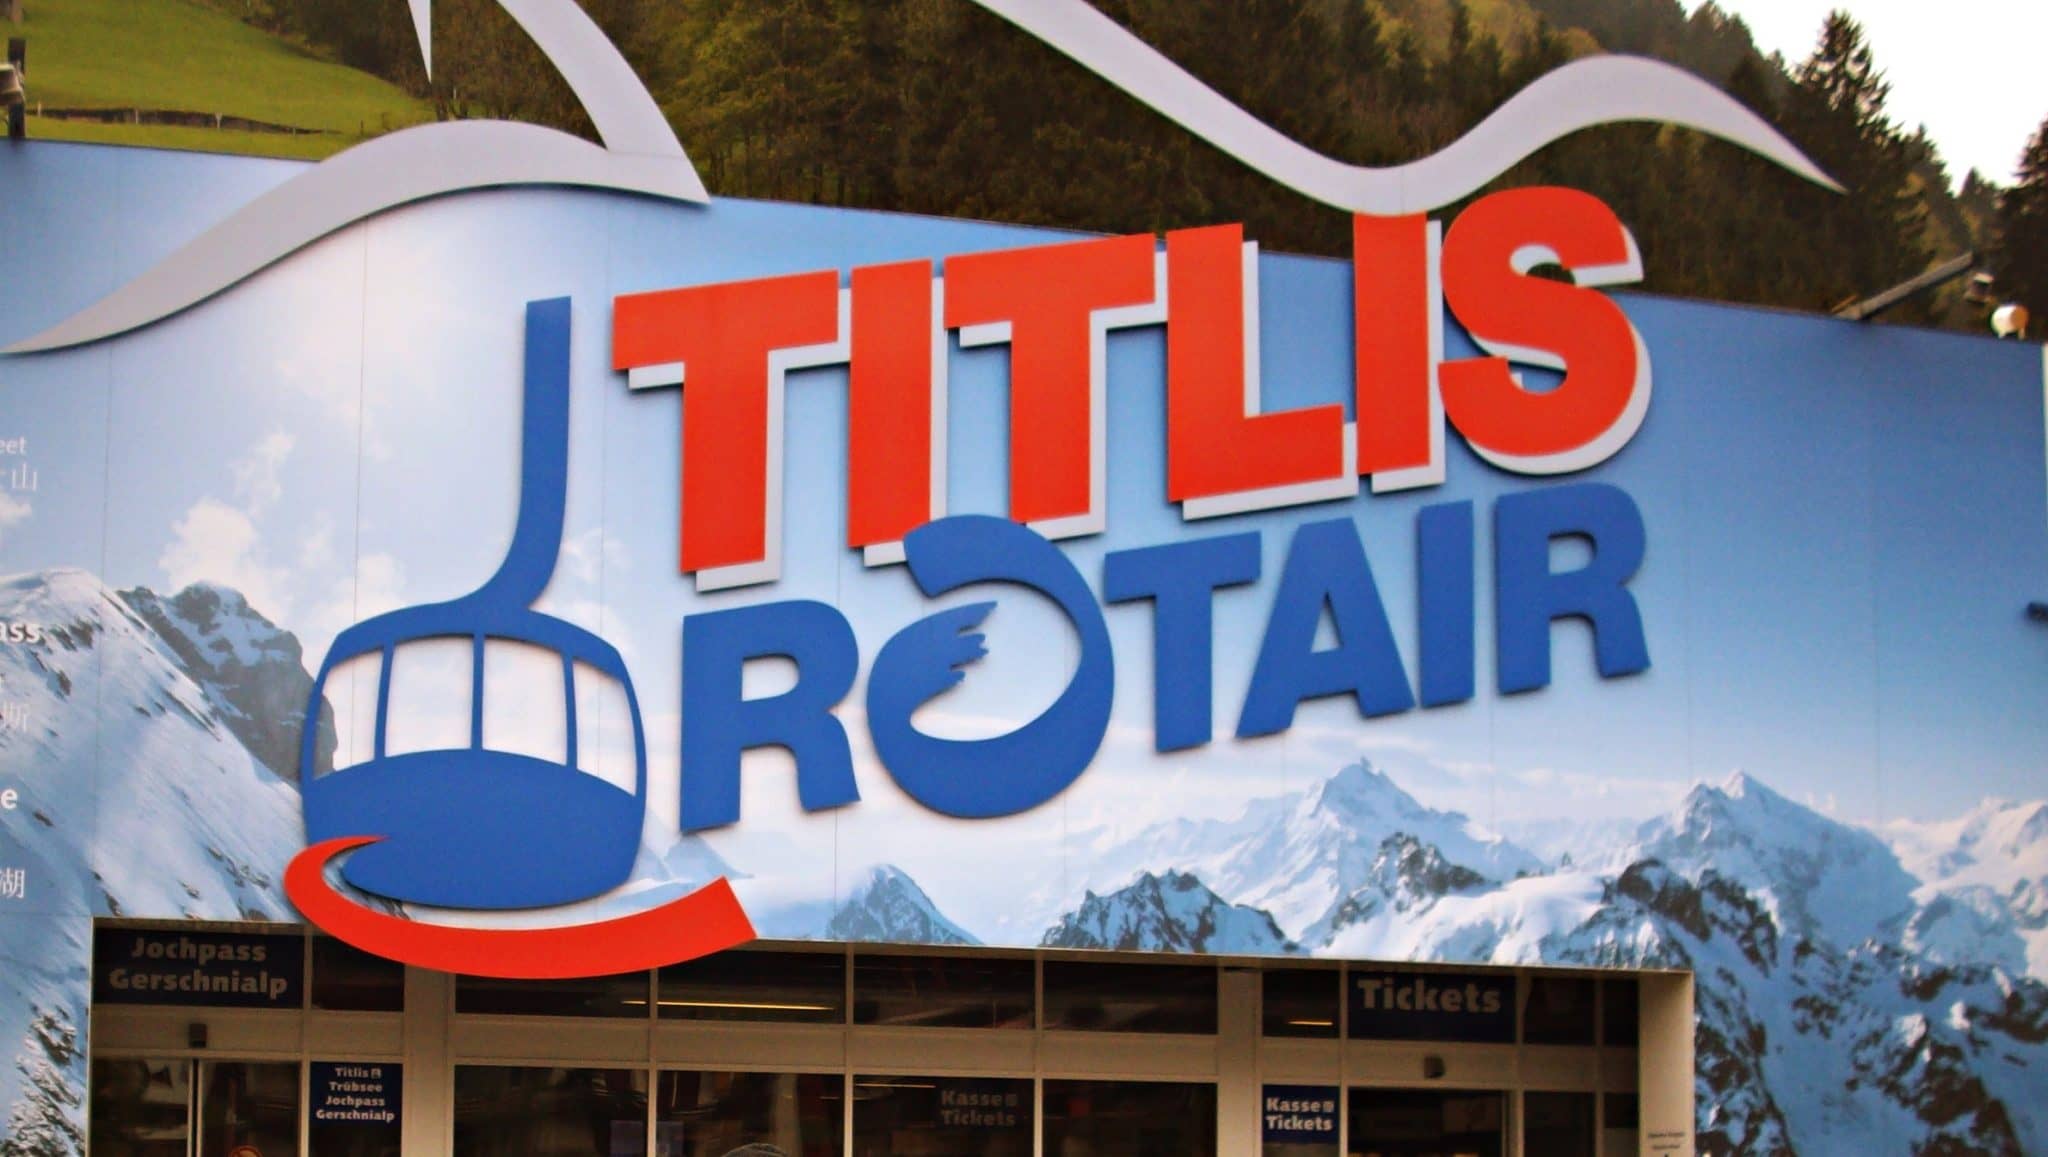 Mount Titlis in Switzerland: See it while you can!